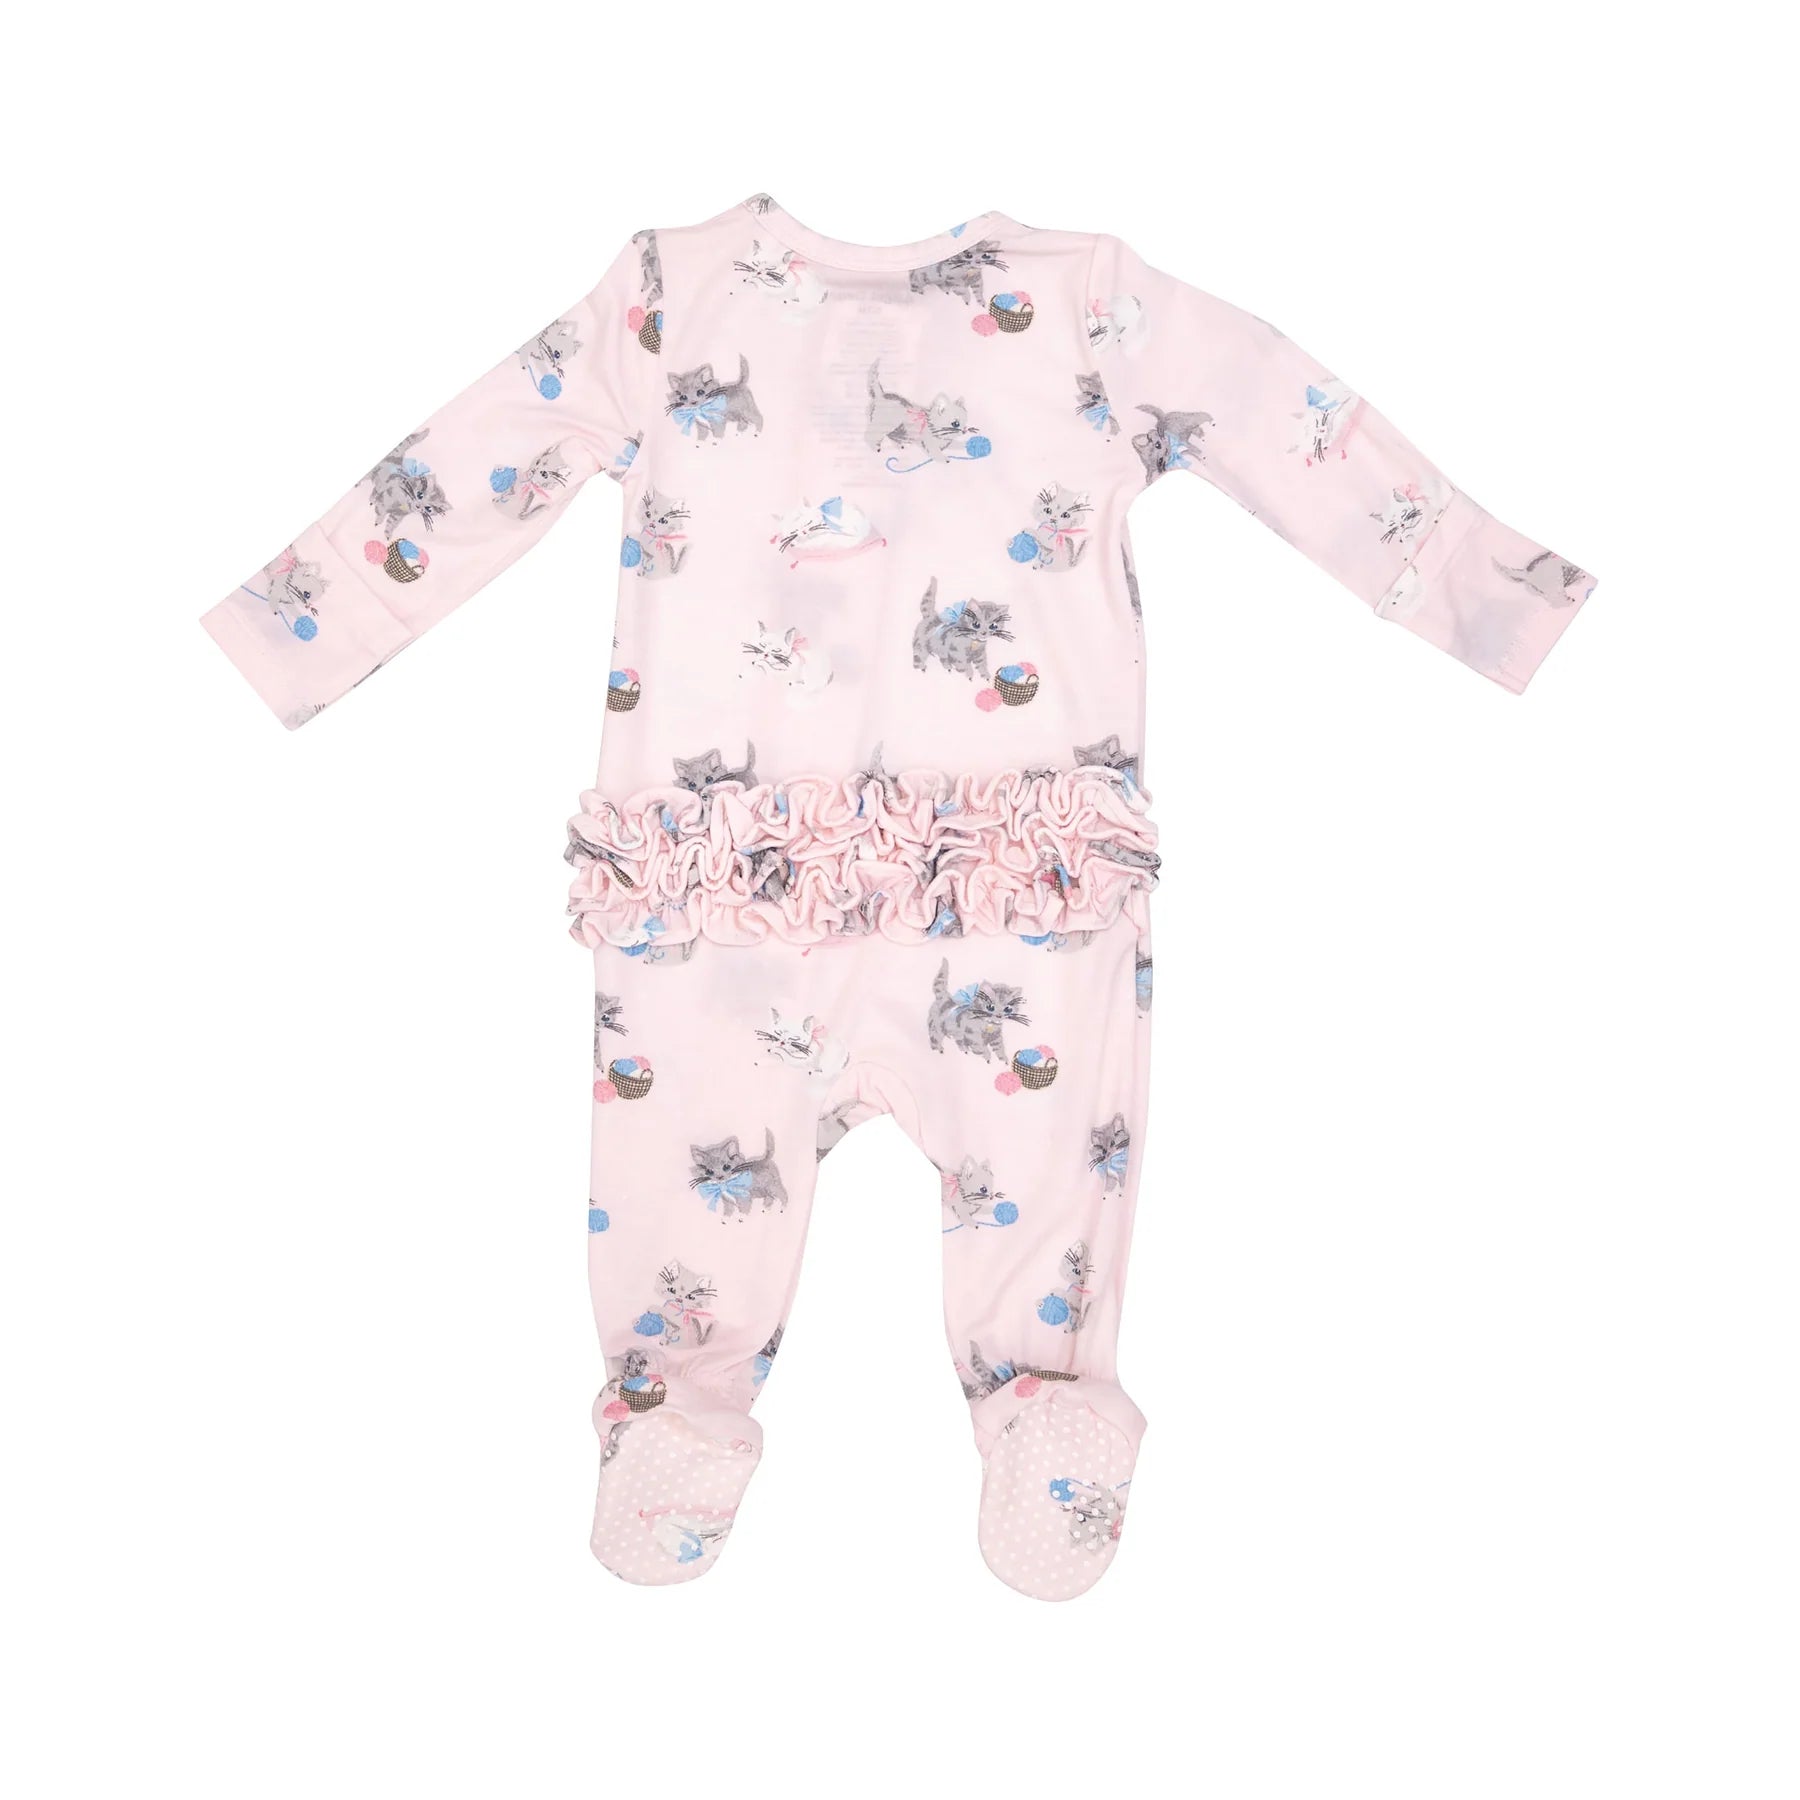 2 way zipper ruffle back pink footie with cats for baby girl